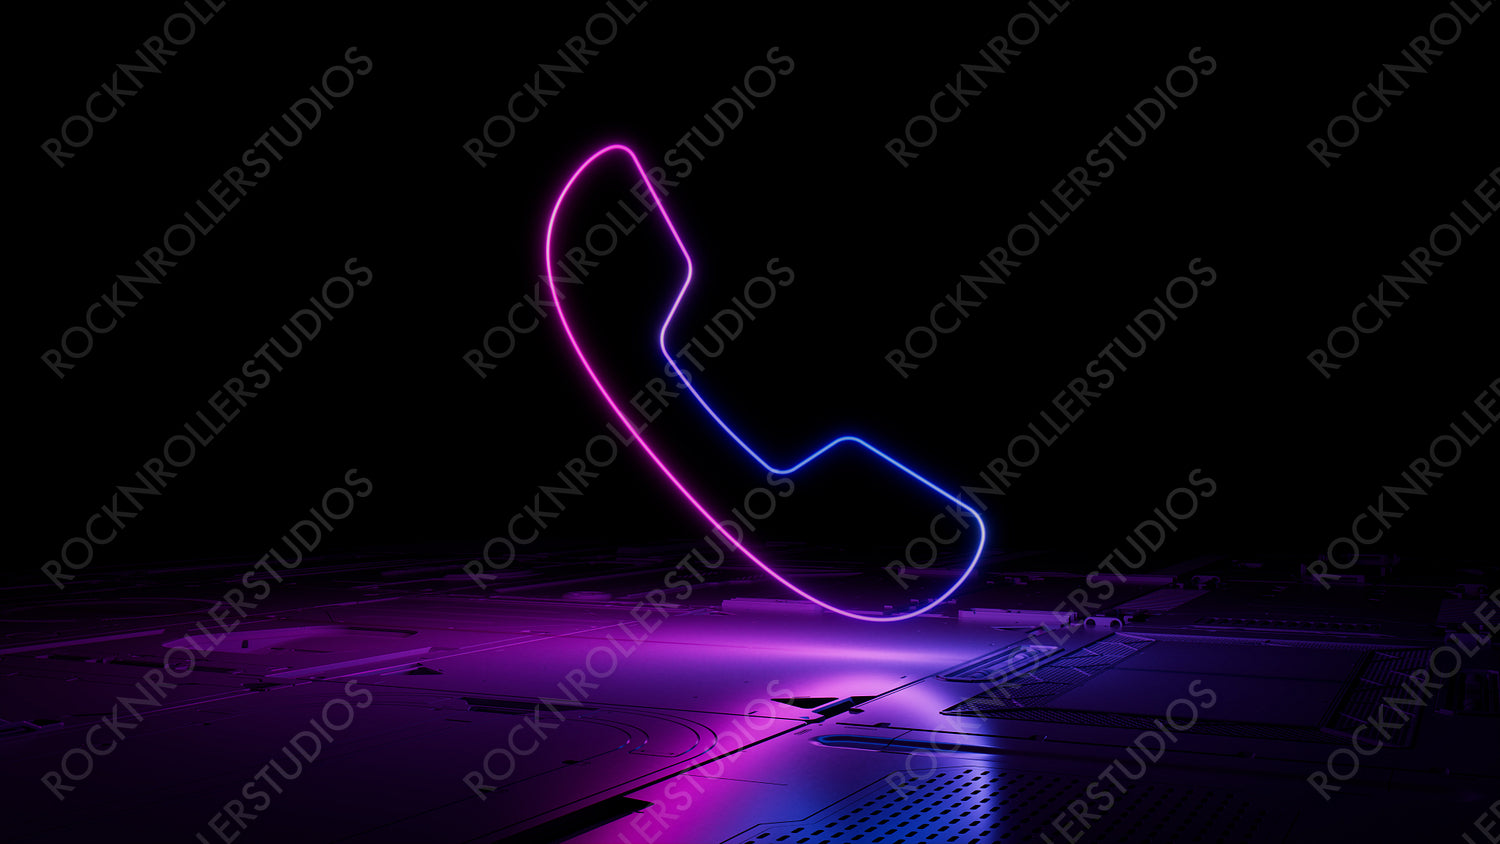 Pink and Blue neon light phone icon. Vibrant colored Communication technology symbol, on a black background with high tech floor. 3D Render